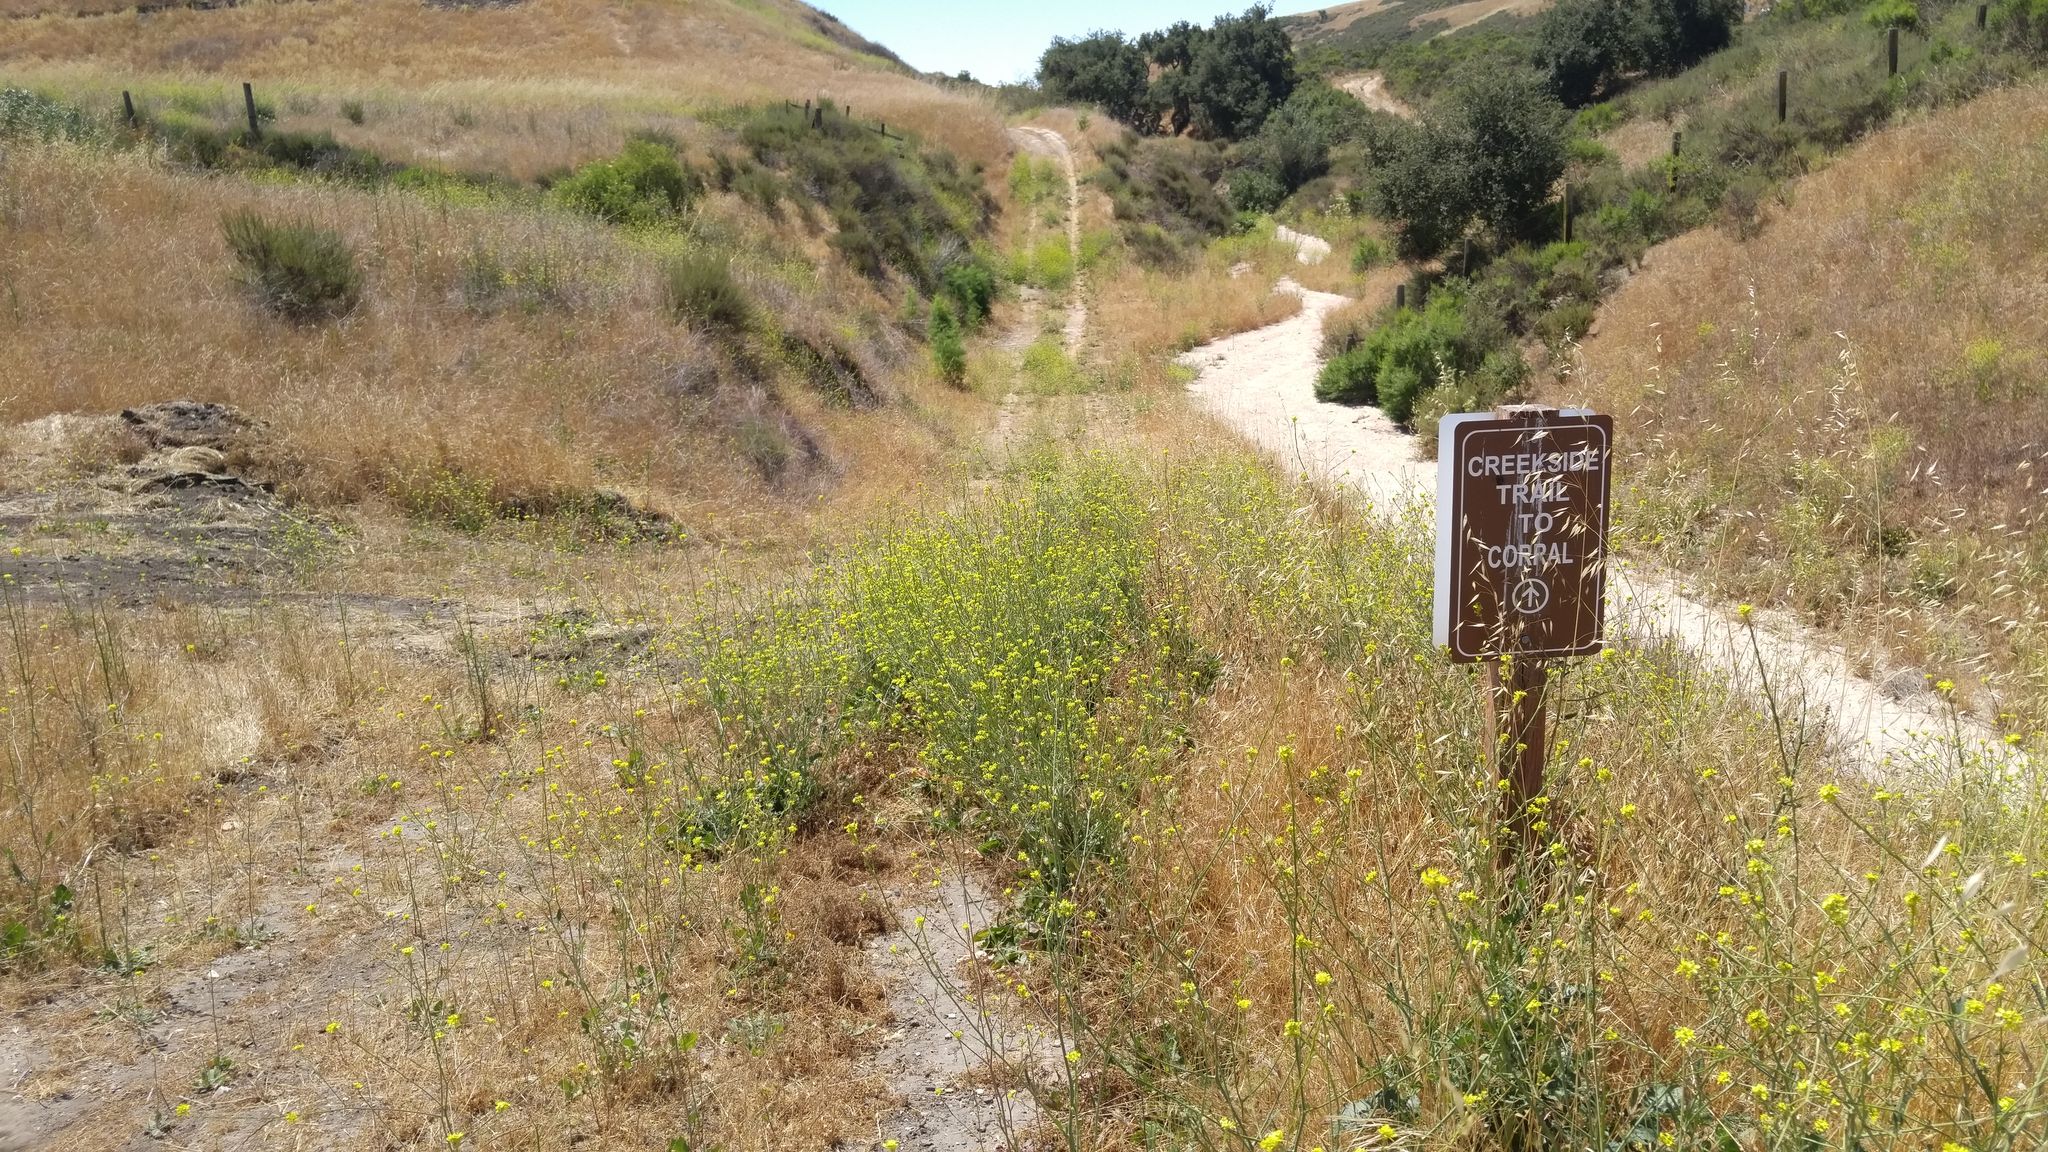 Creekside trail to Corral sign